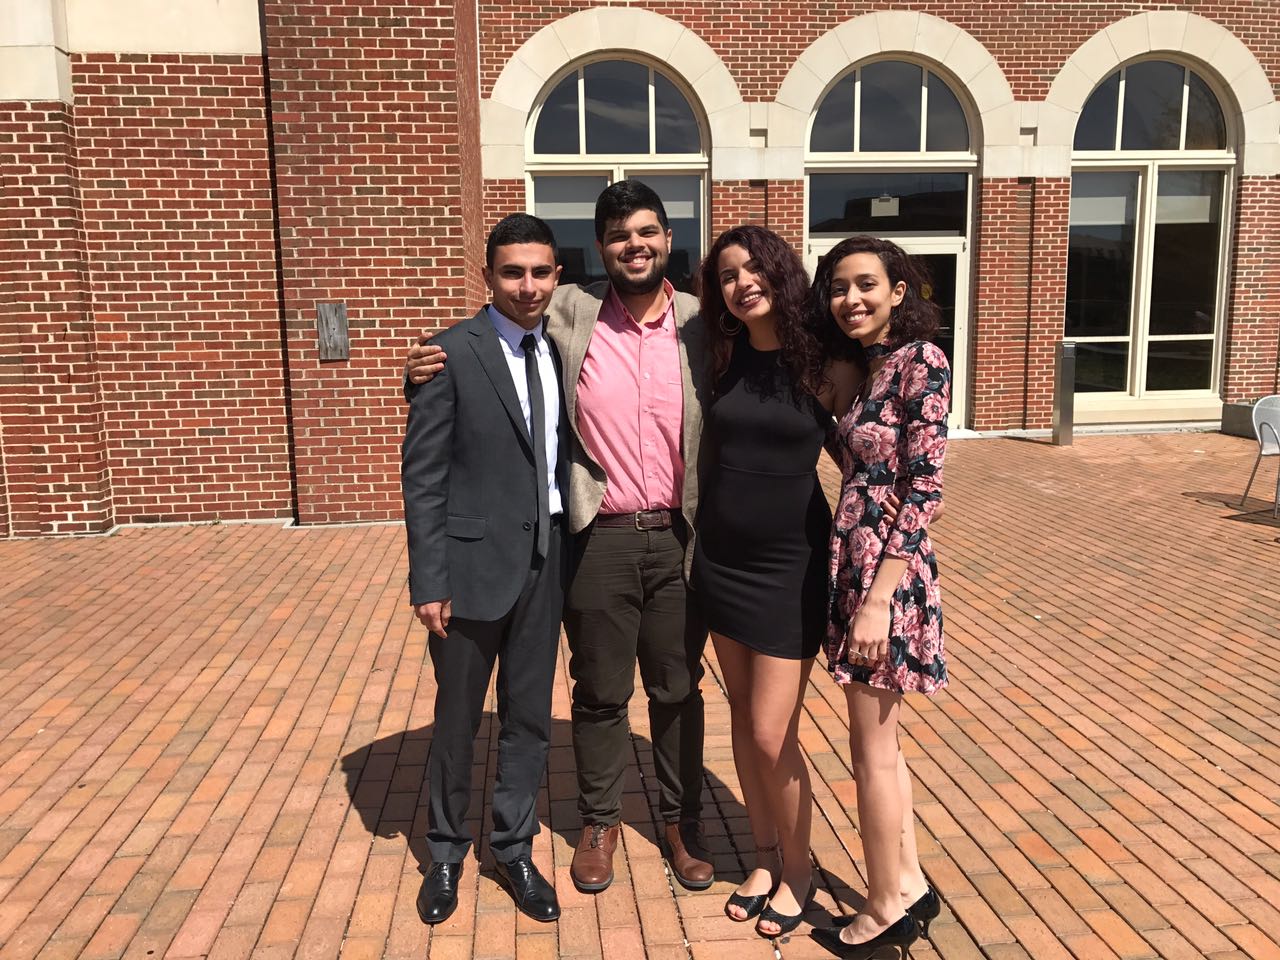 AUC students visited Washington D.C. to participate in Georgetown University’s 34th U.S. National Universities Model Arab League.